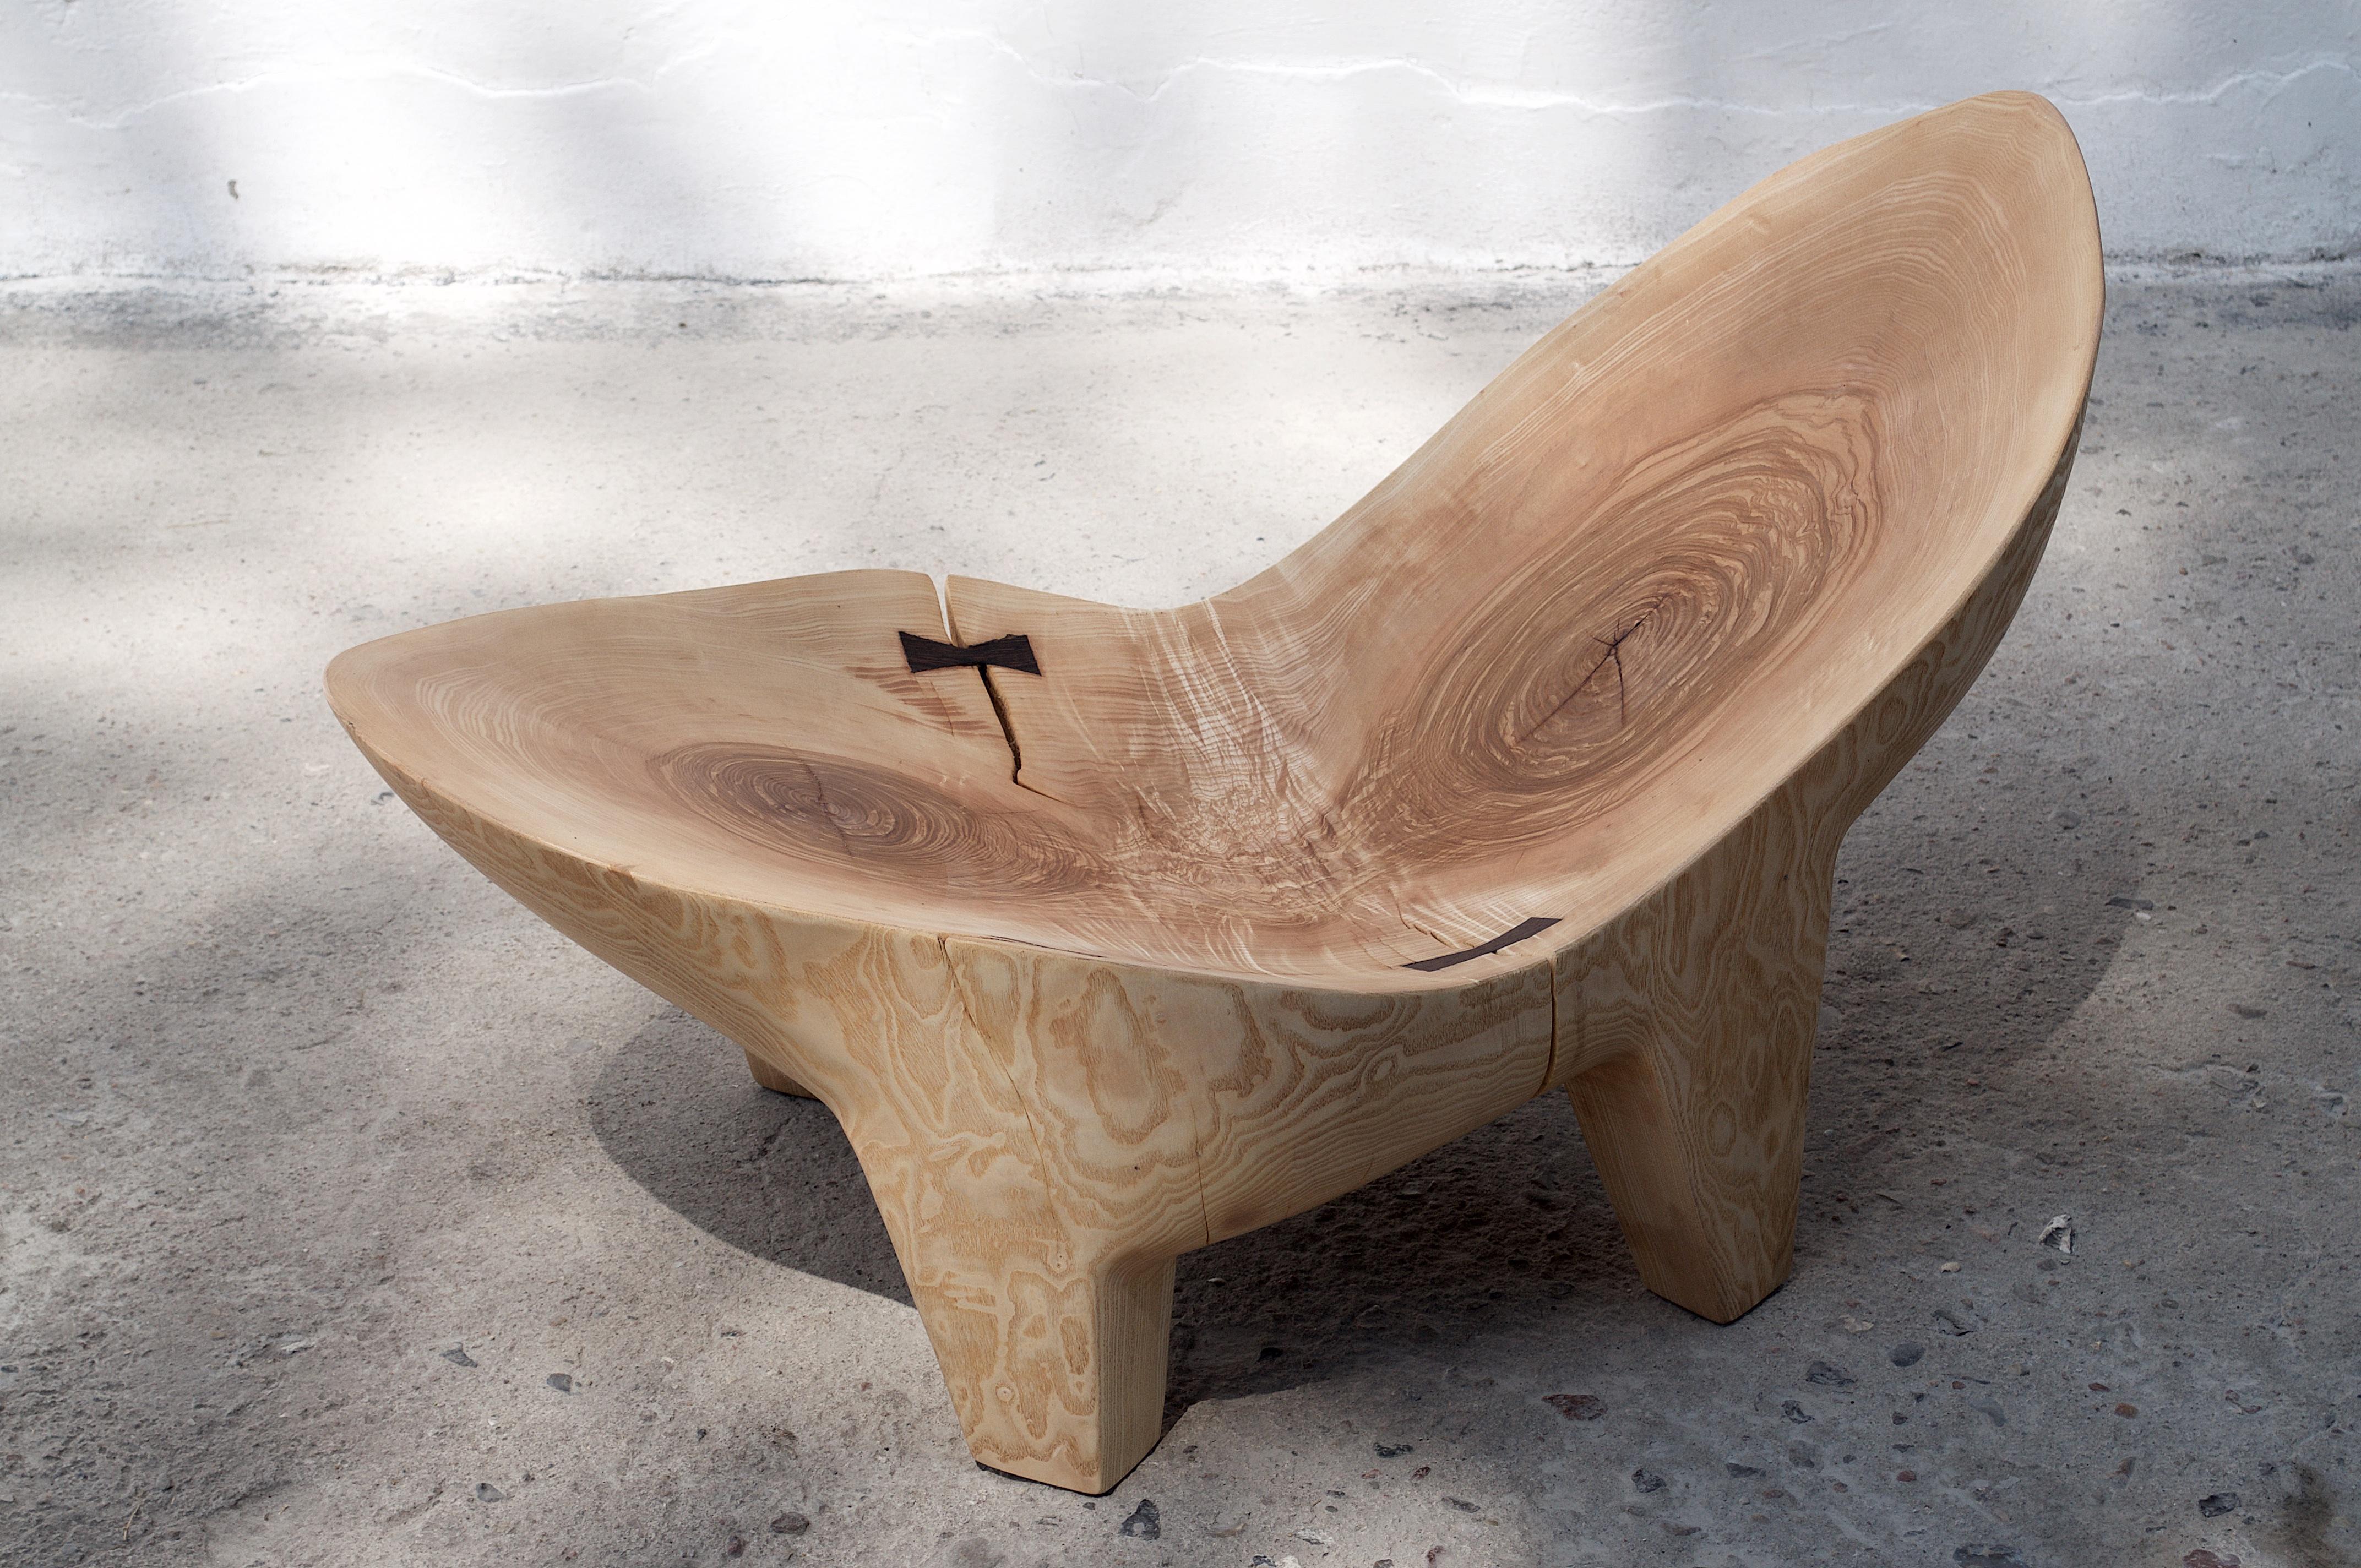 Unique Ash Sculpted Chair by Jörg Pietschmann
Ash
Dimensions: H 58 x W 95 x D 53 cm


Side piece of an old oak with exceptional burl on colorful legs. Polished oil finish.

In Pietschmann’s sculptures, trees that for centuries were part of a